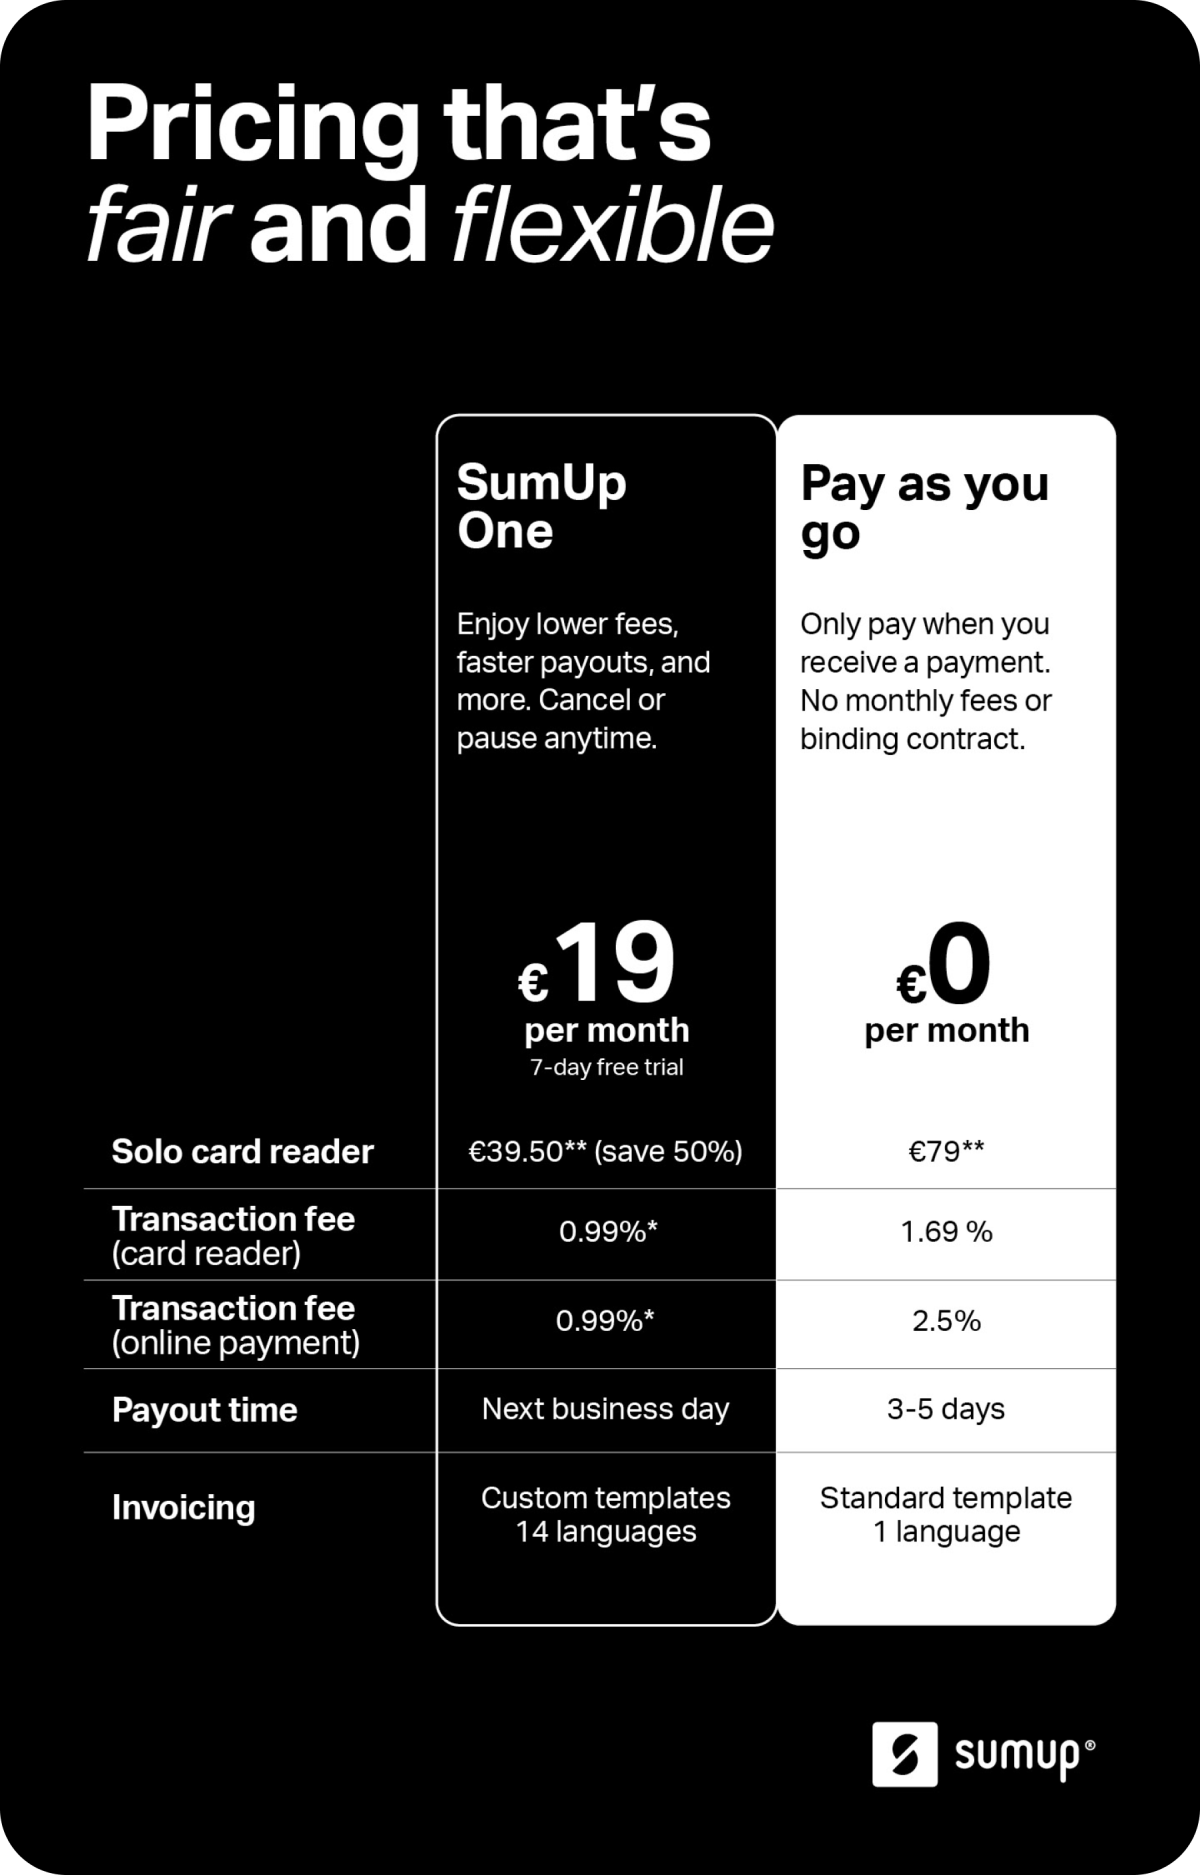 Image showing the differences between the SumUp One plan and the Pay-as-you-go option. With SumUp One, you save 50% on a SumUp Solo card reader, over 40% on transaction fees, you get next day payouts every day, full invoicing software and priority support.